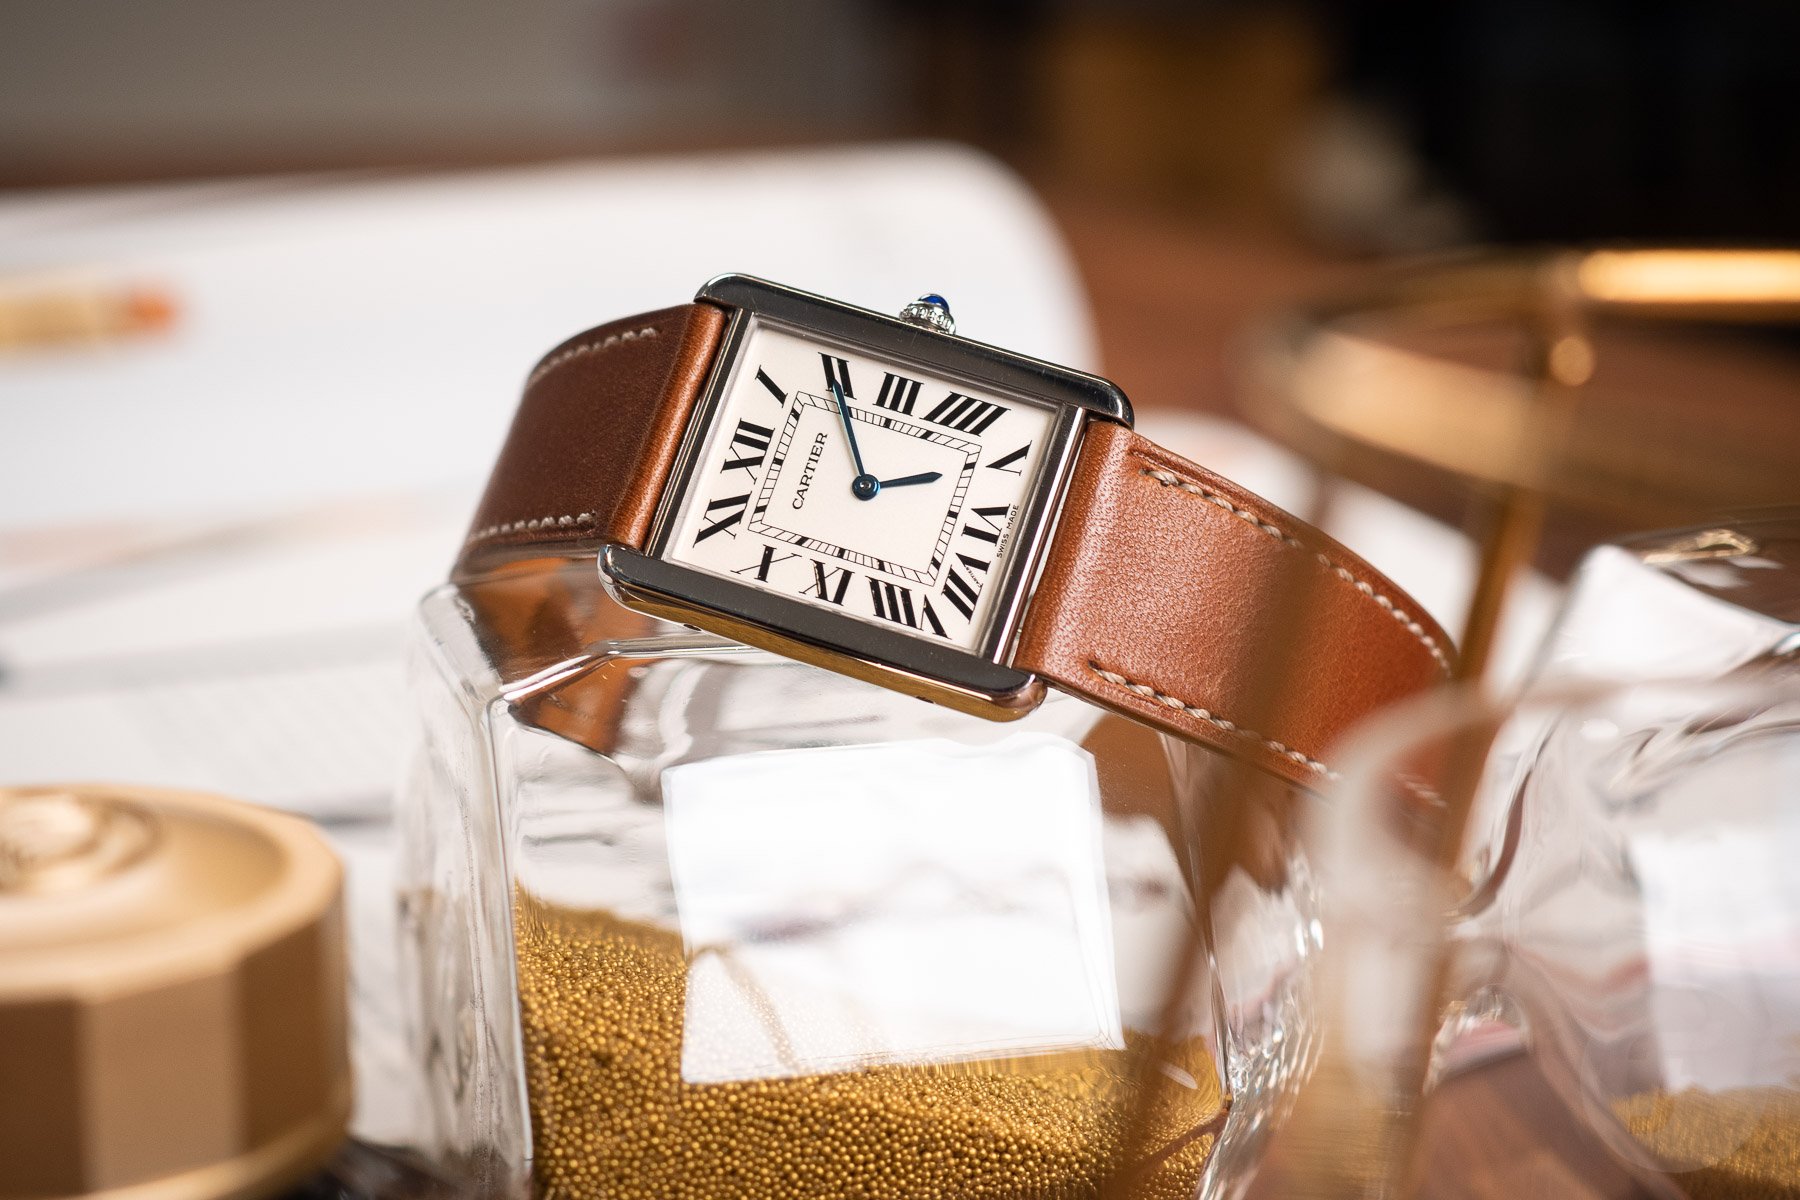 The Cartier Tank: An Iconic Watch With A Rich History